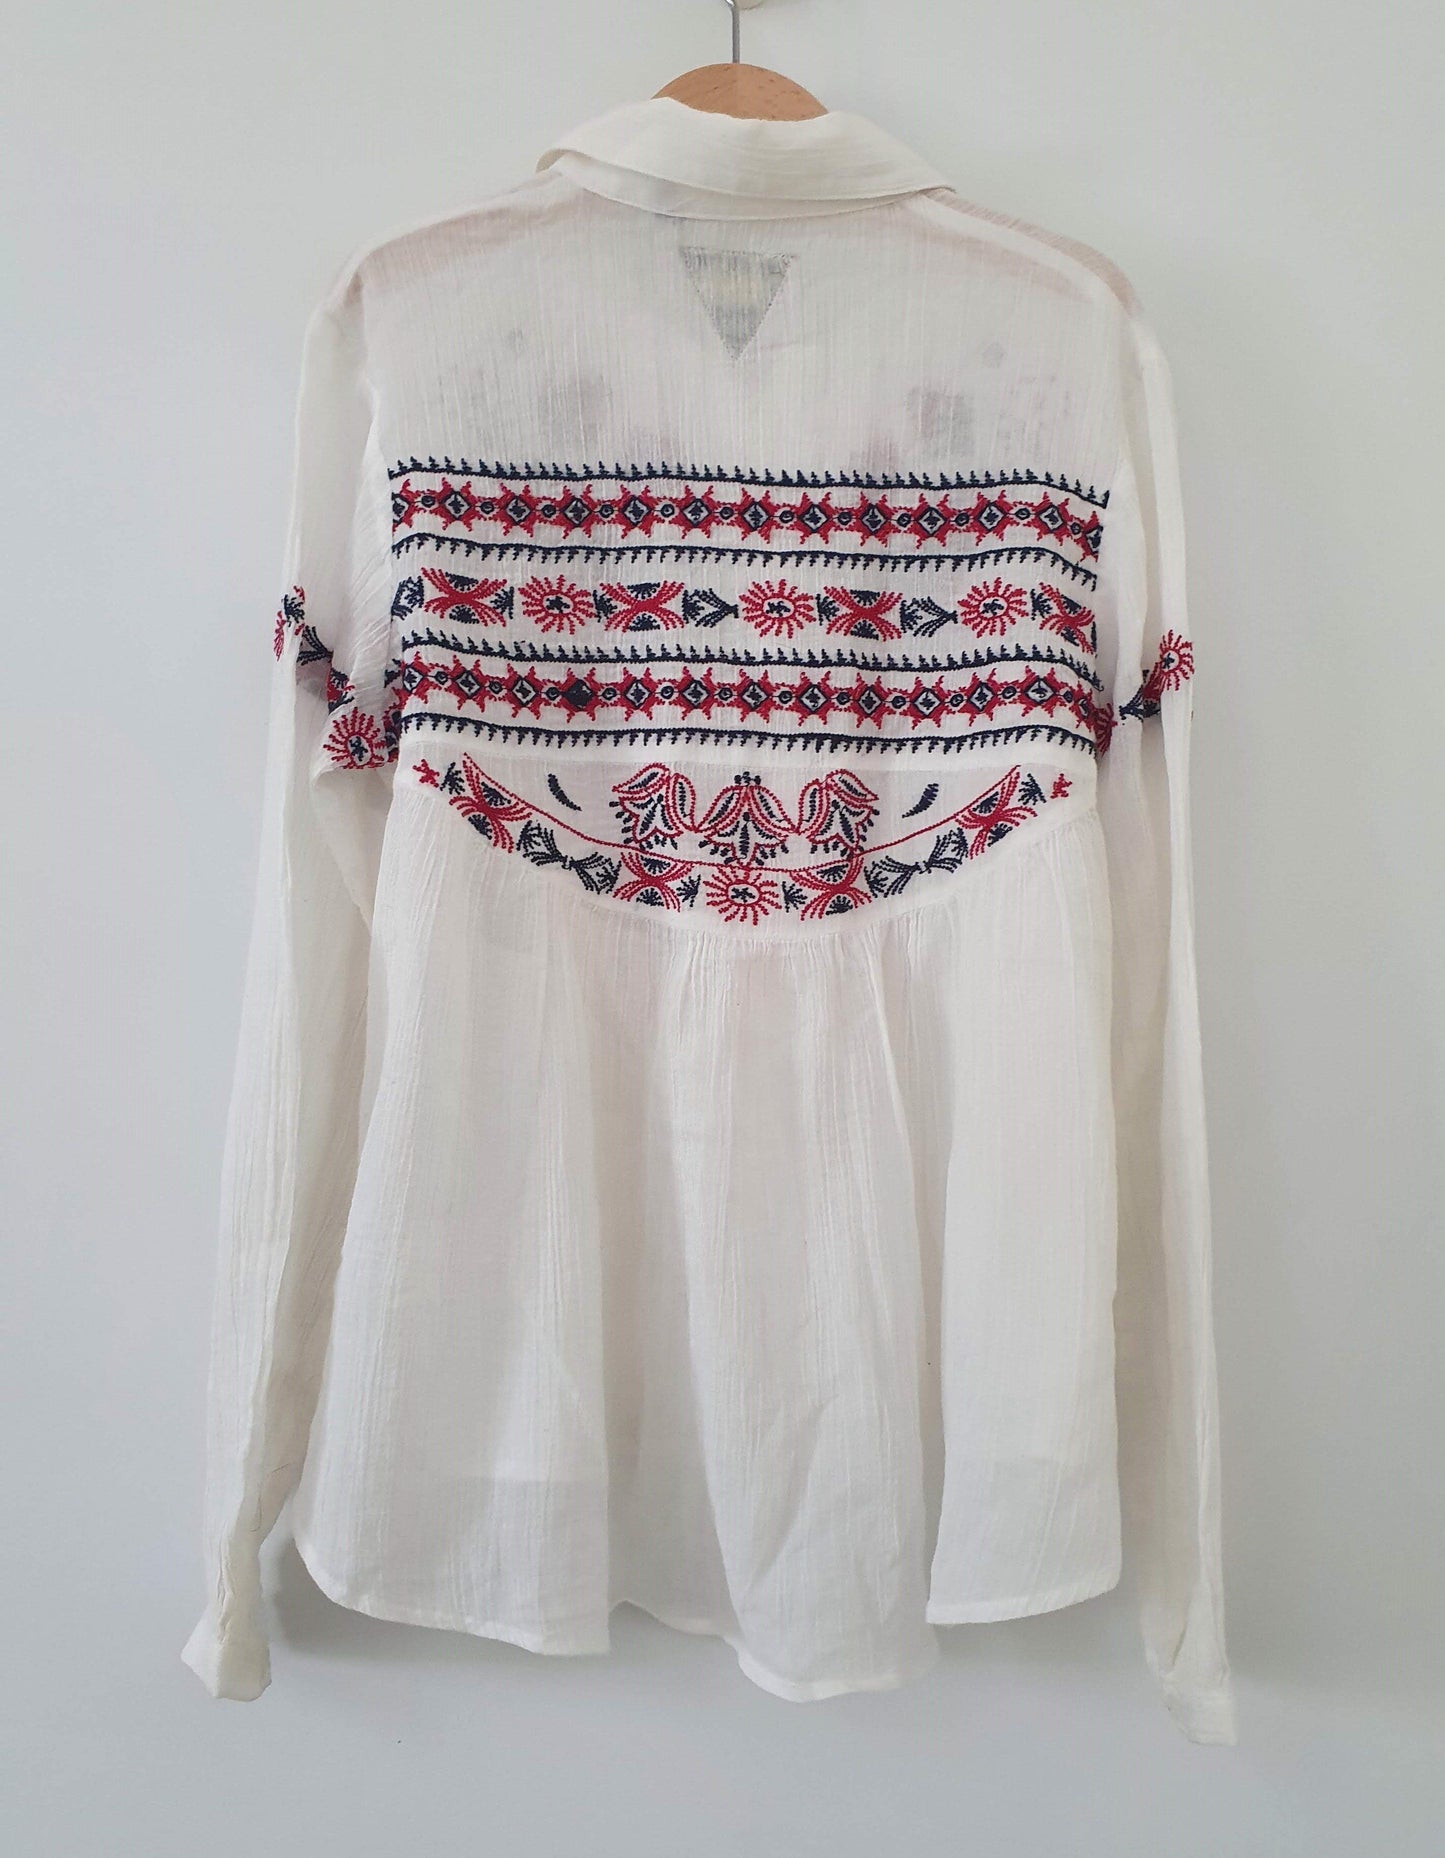 White shirt with embroidery IKKS IKKS  (4596780269623)